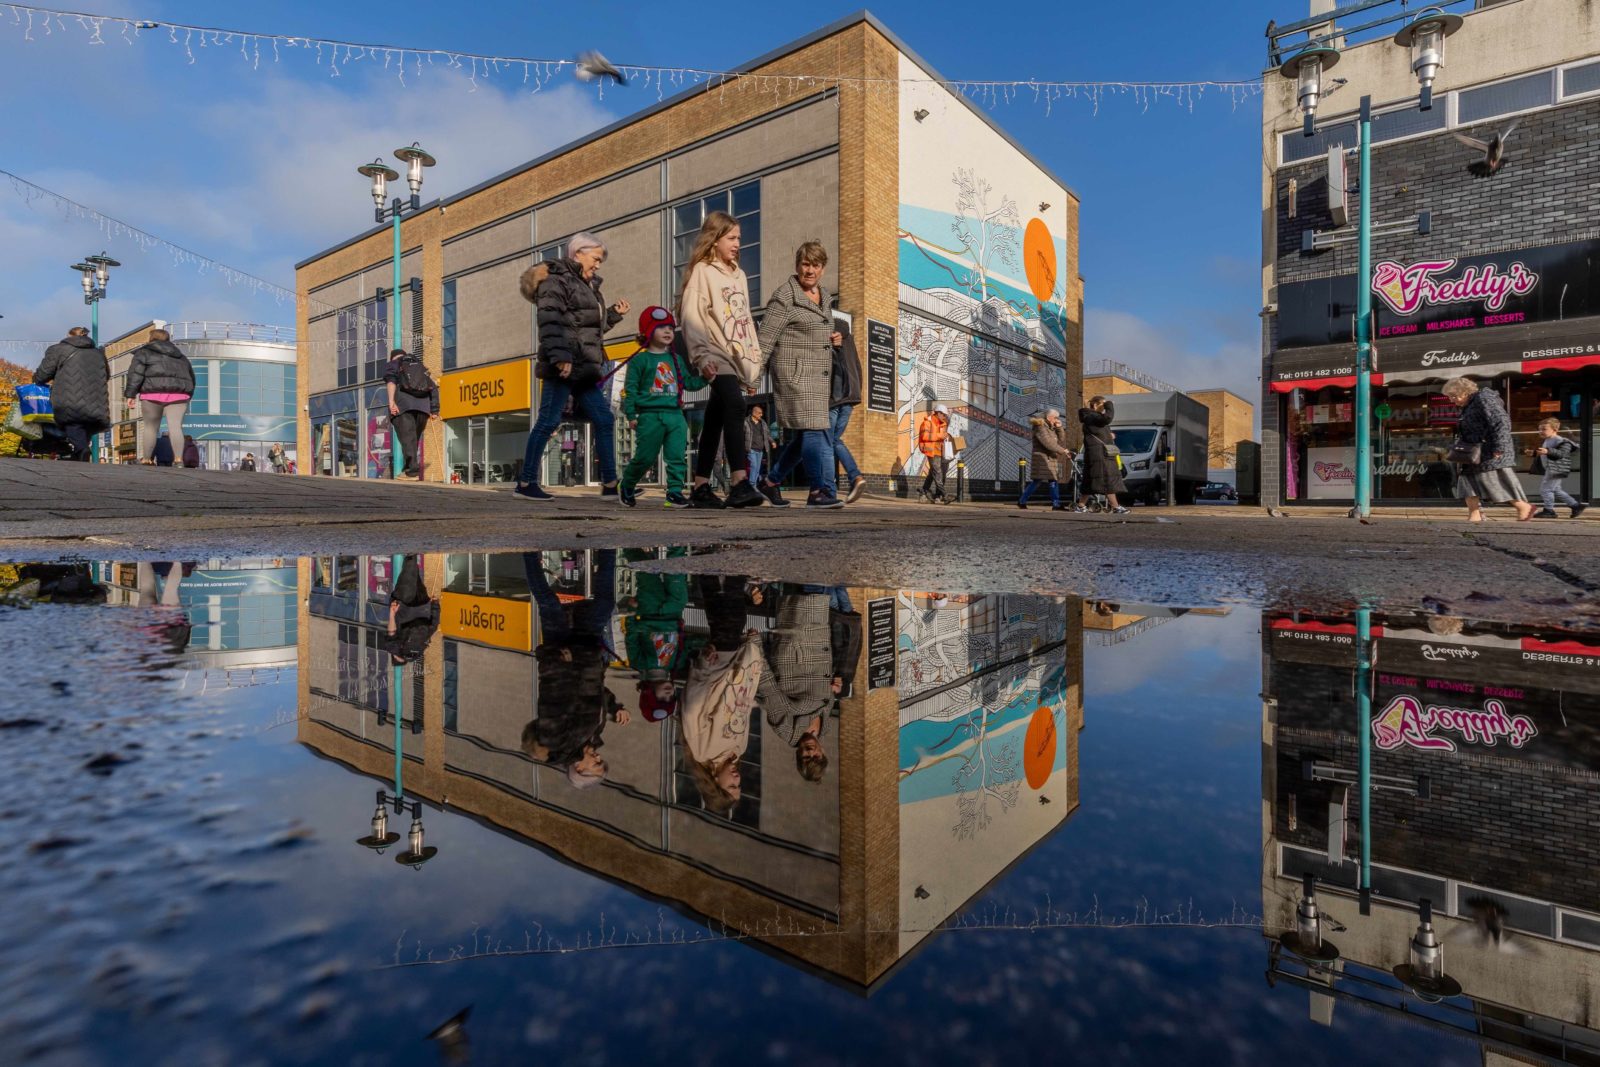 a family walks past the mural on Huyton High Street, their reflections are shown in a puddle below them, and the mural's reflection is behind them.